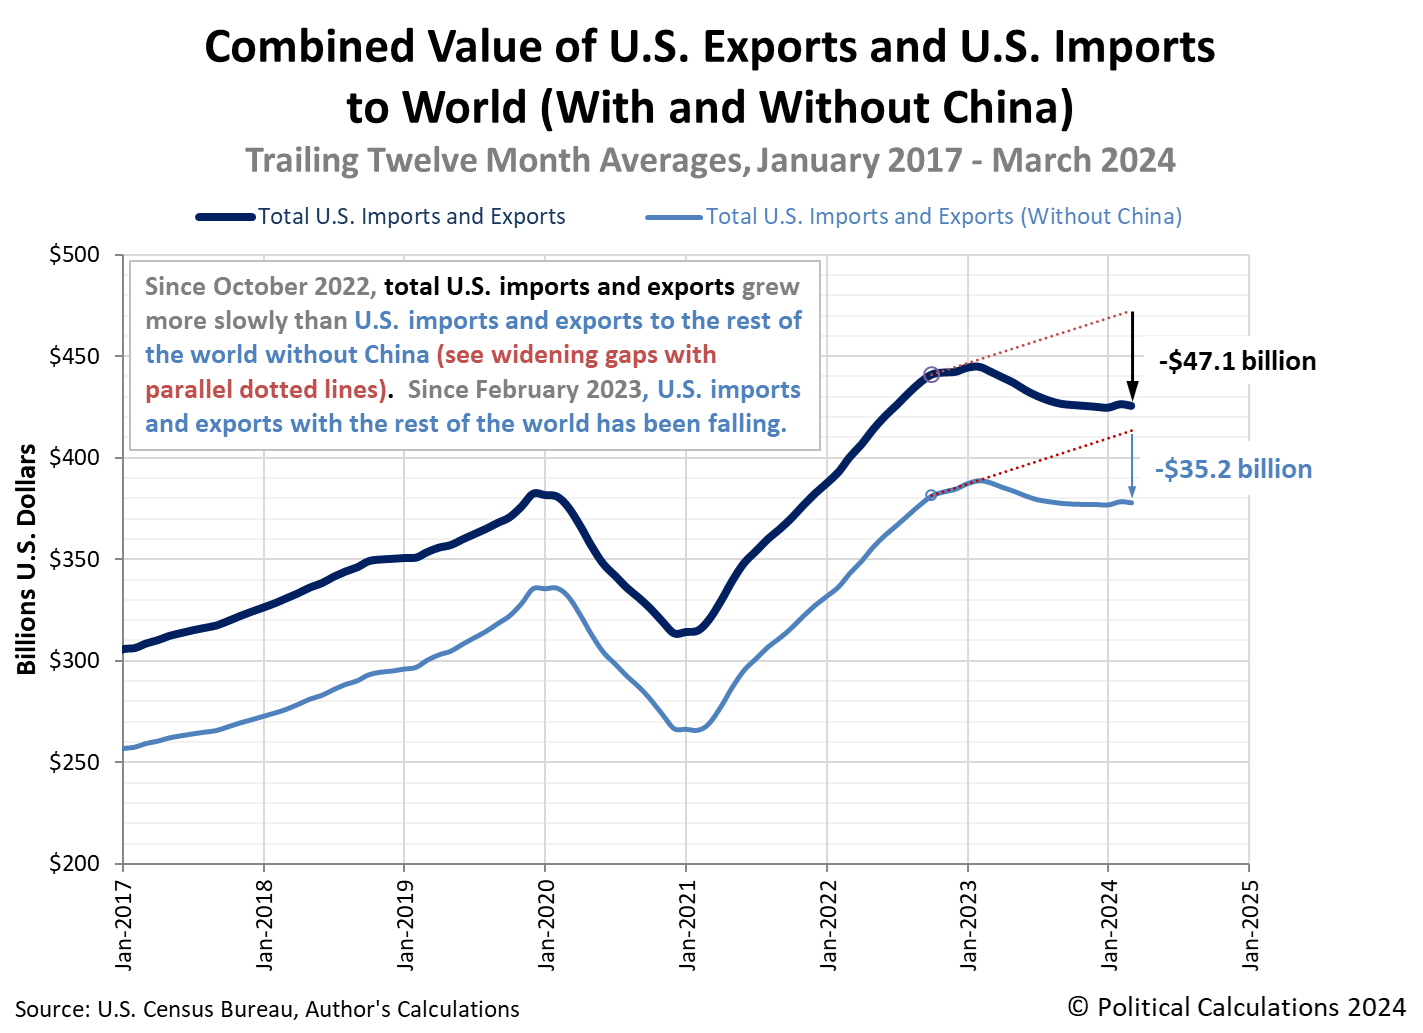 Combined Value of U.S. Exports and U.S. Imports to World (With and Without China) Trailing Twelve Month Averages, January 2017 - March 2024